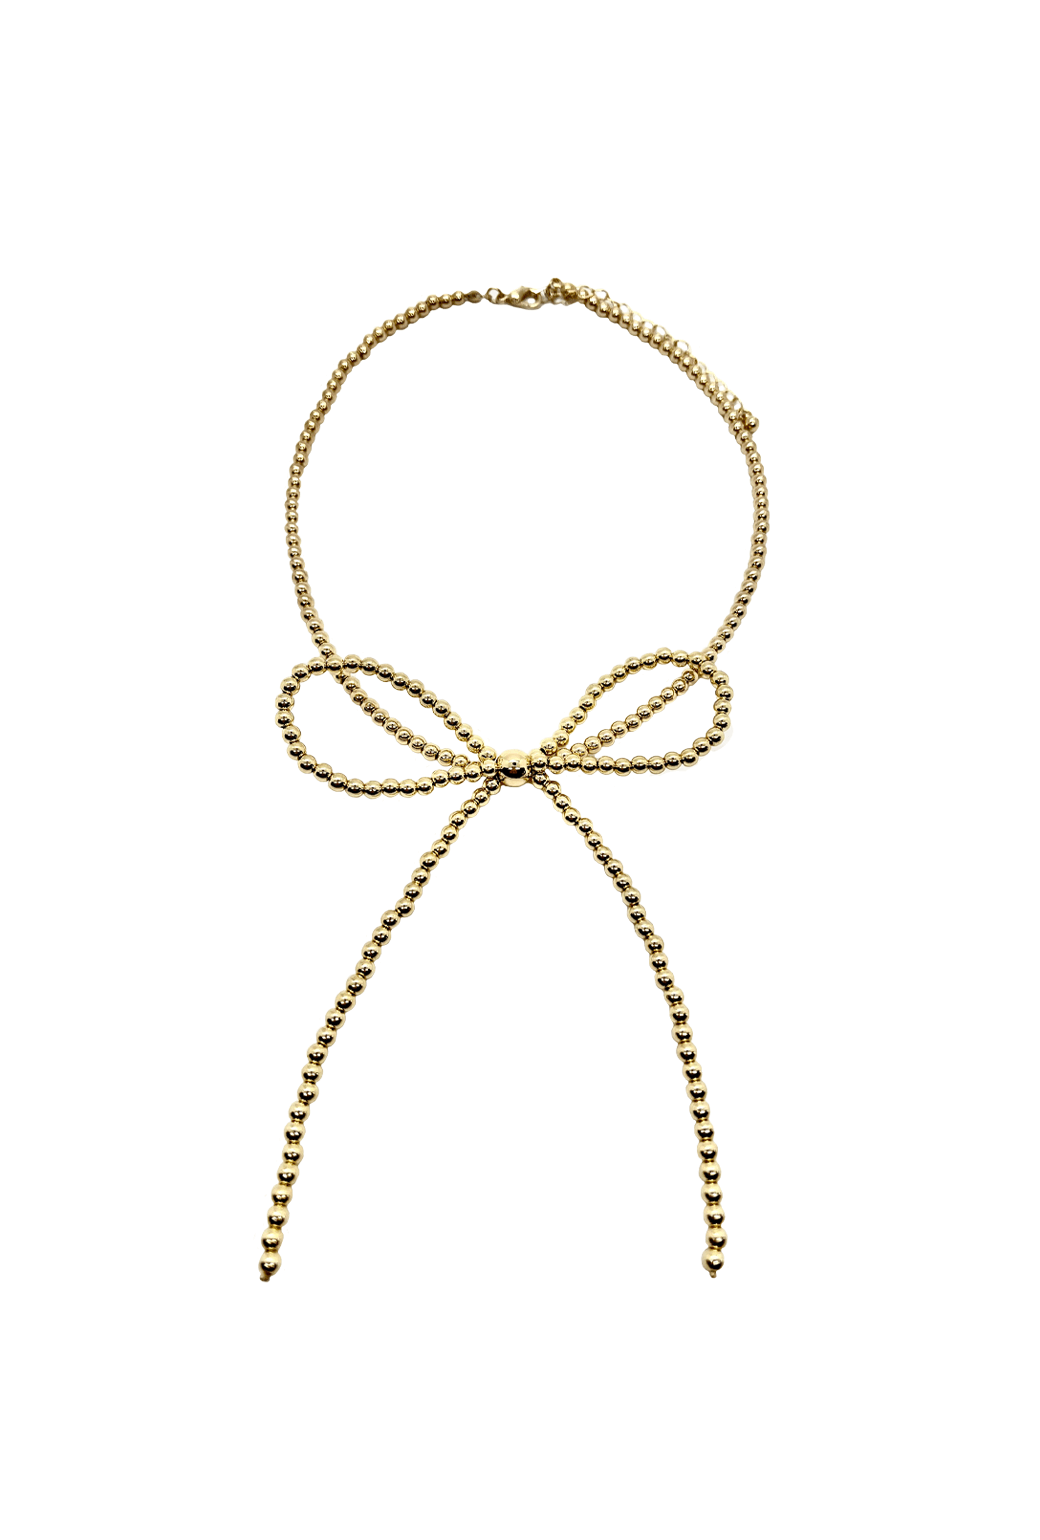 Beaded Bow Necklace - Gold